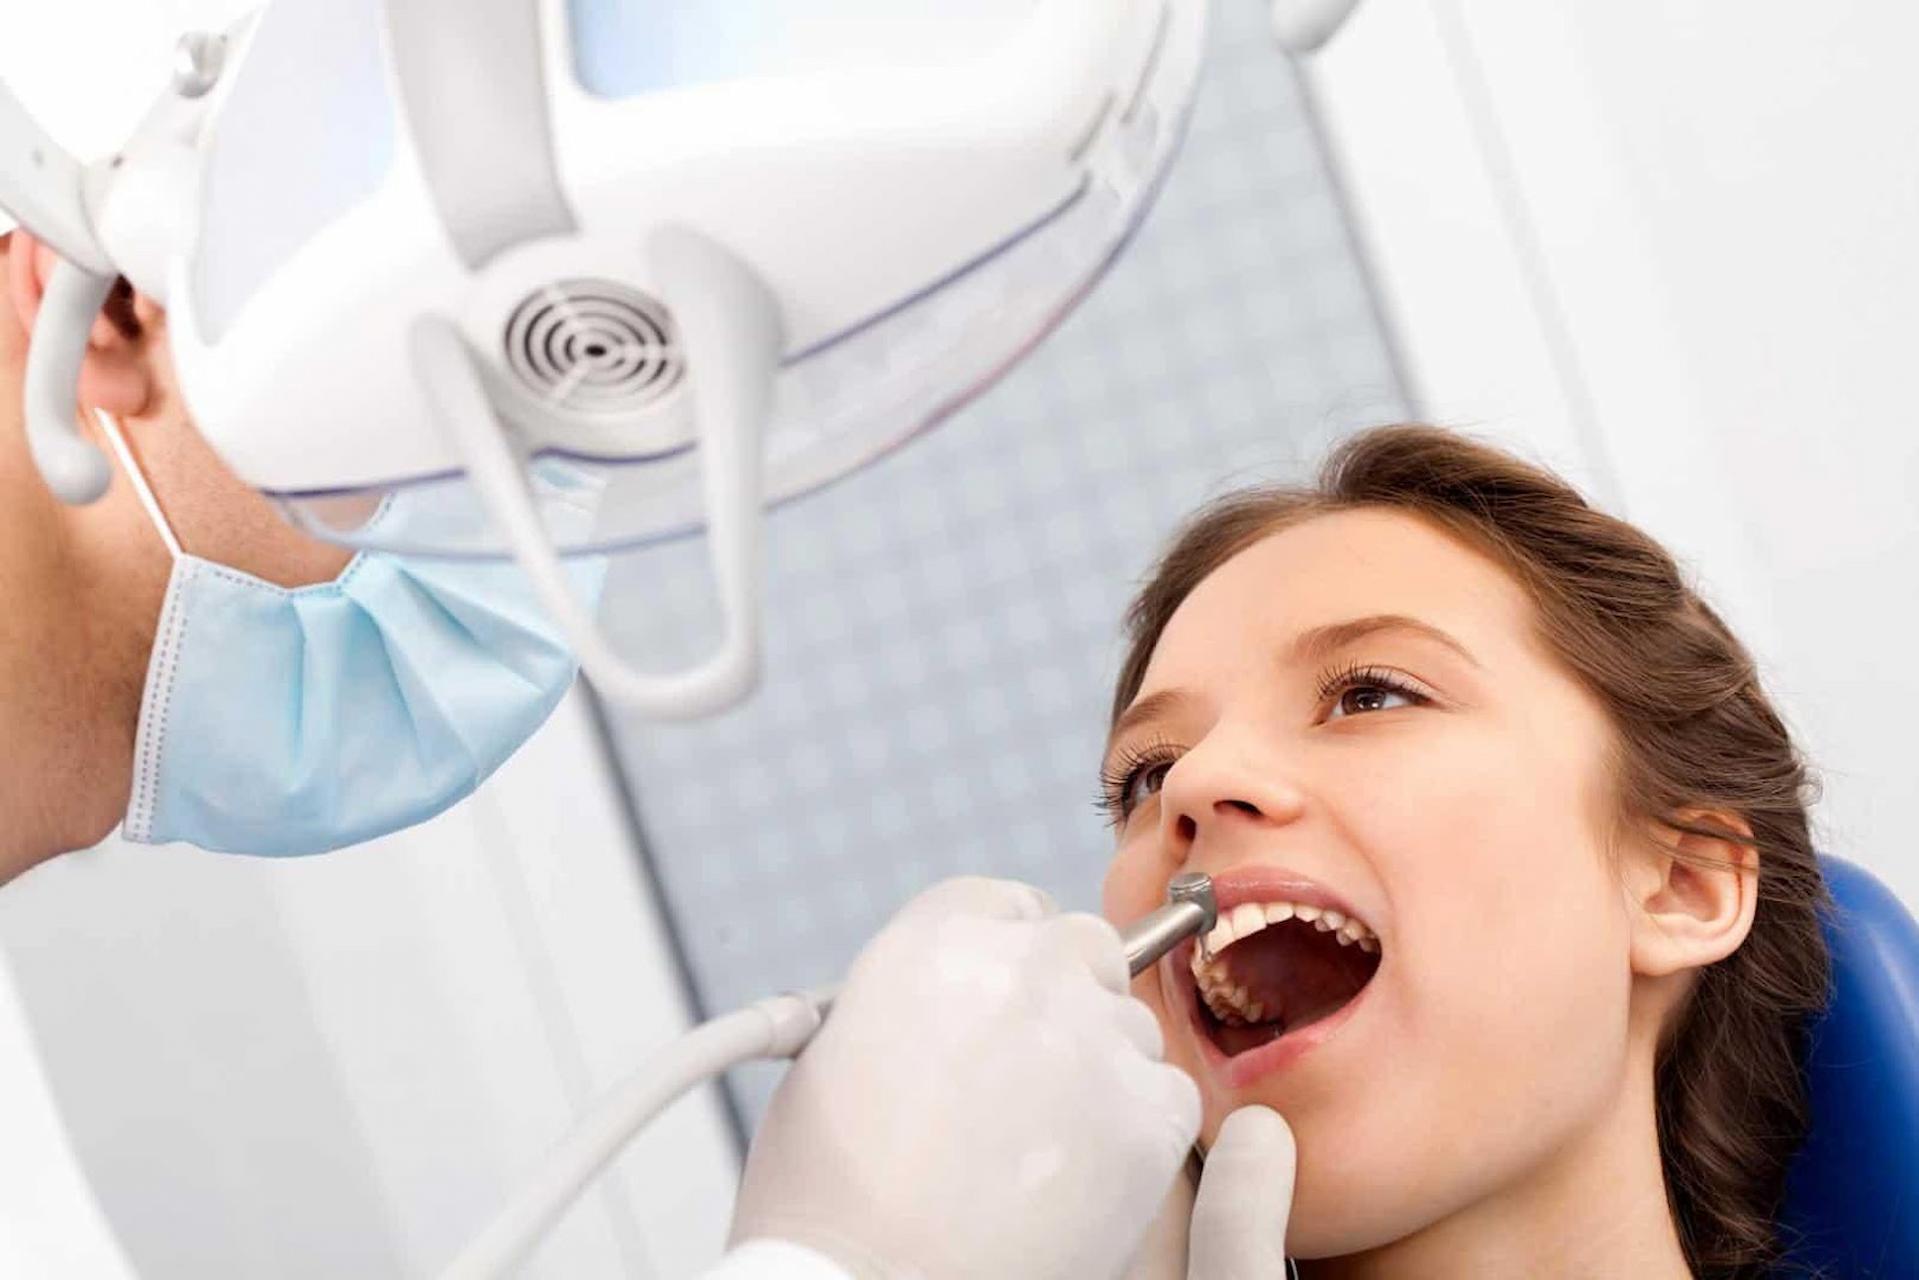 Importance Of Dental Health When Improving Overall Health